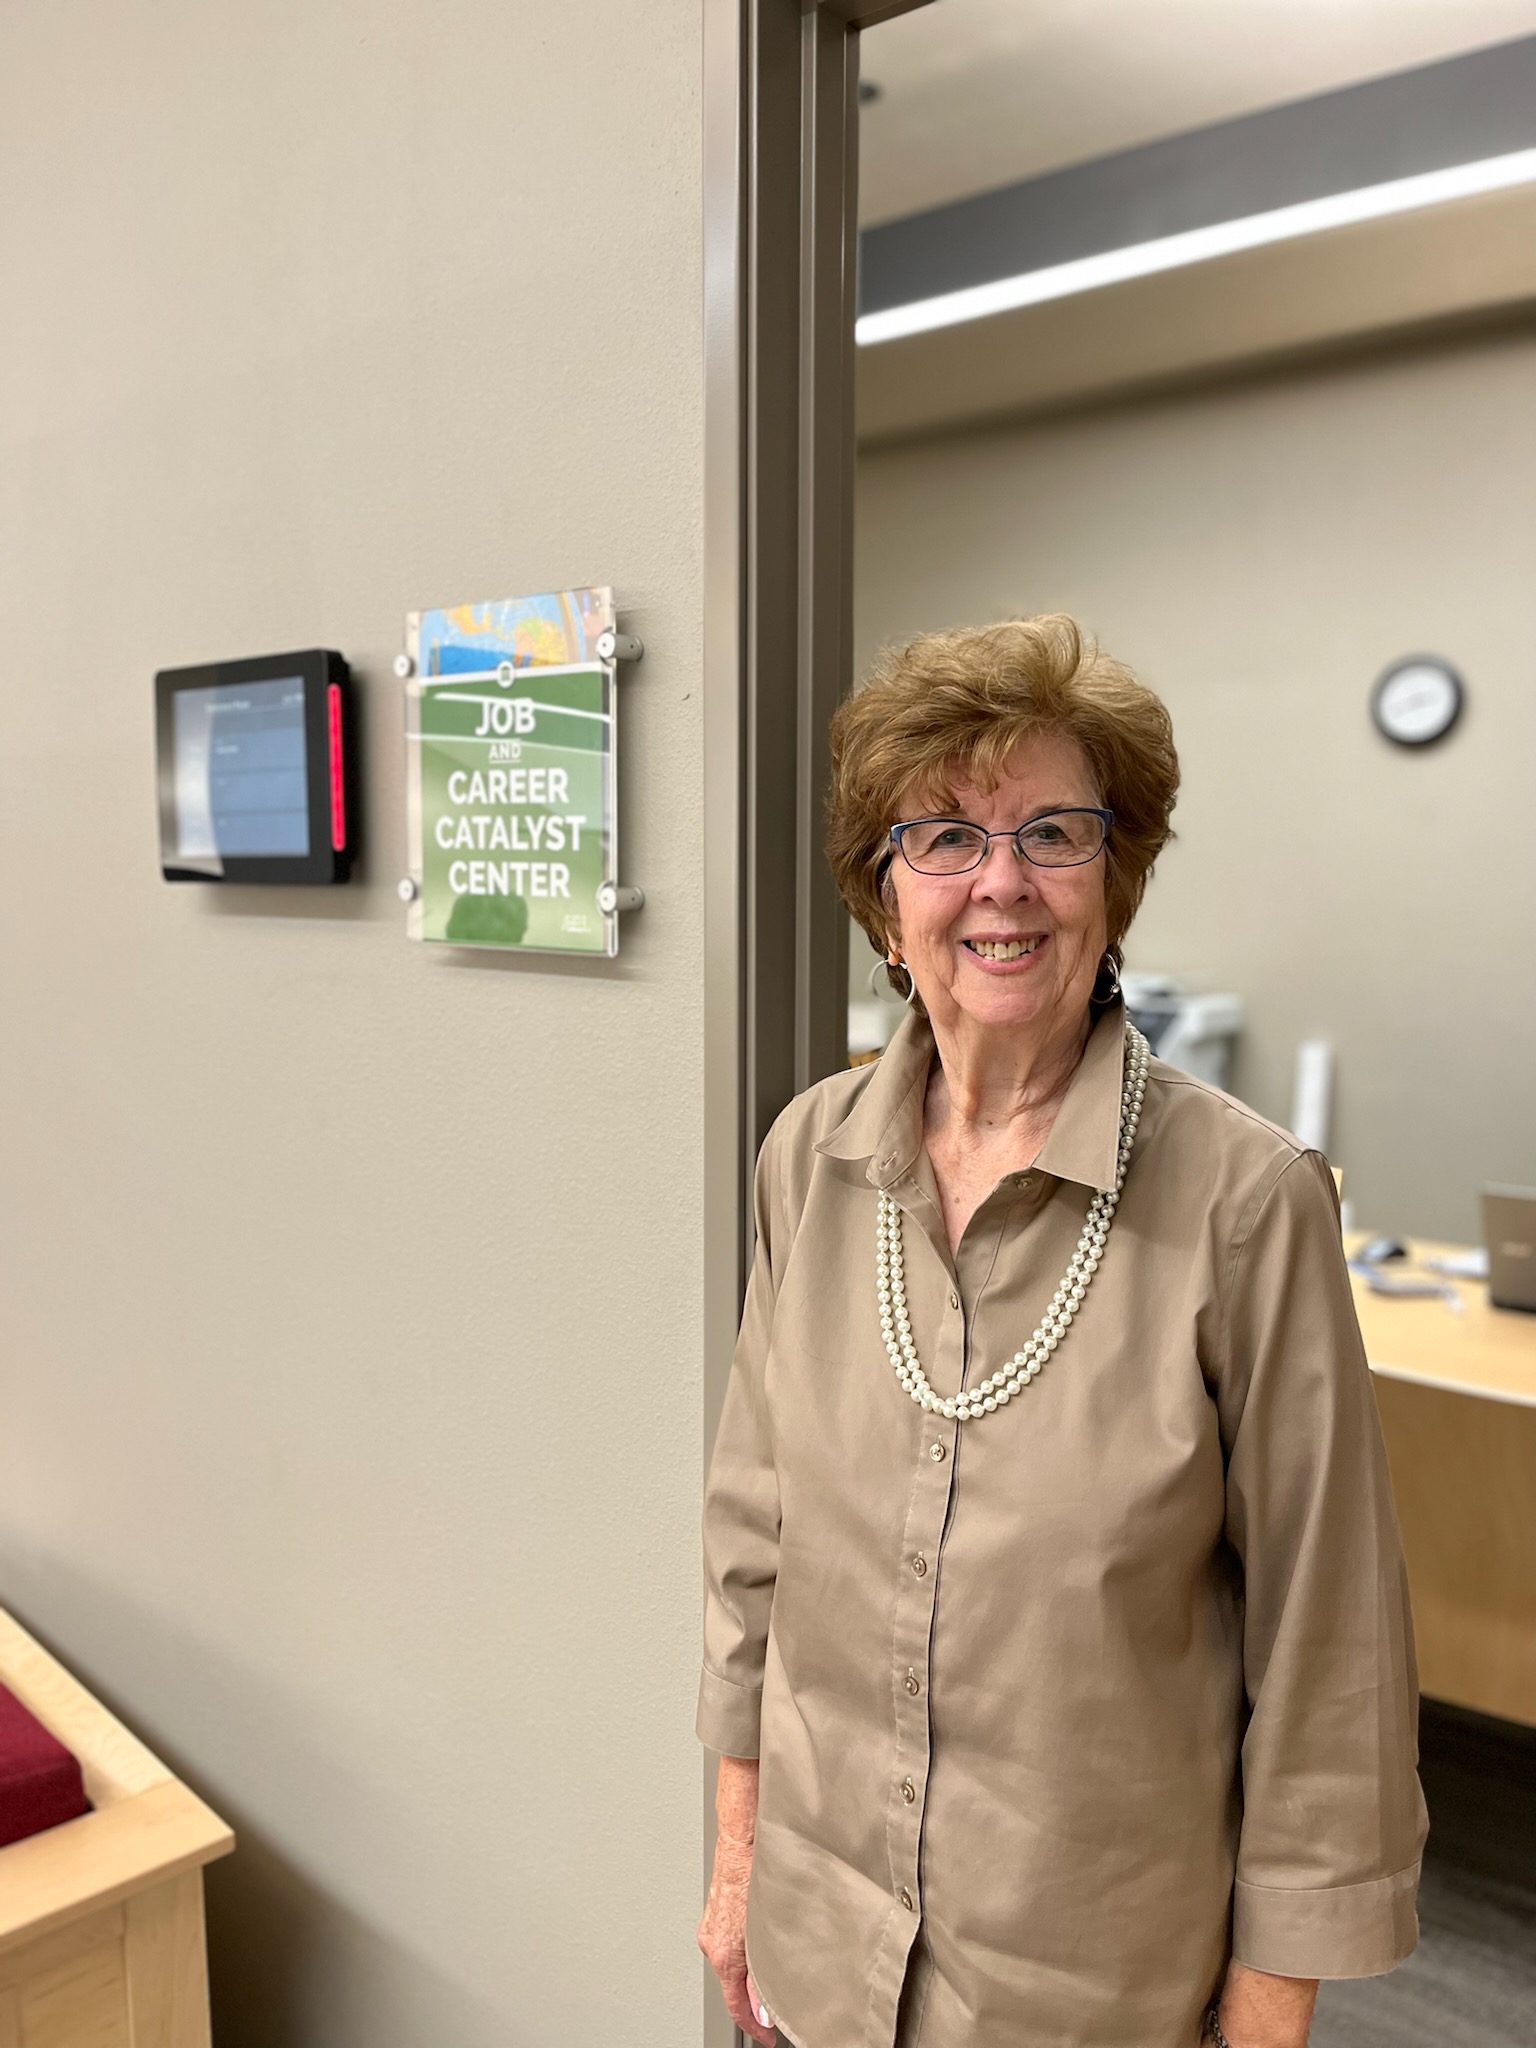 Job and Career Coach Bev Rhoades in tan shirt standing outside conference room